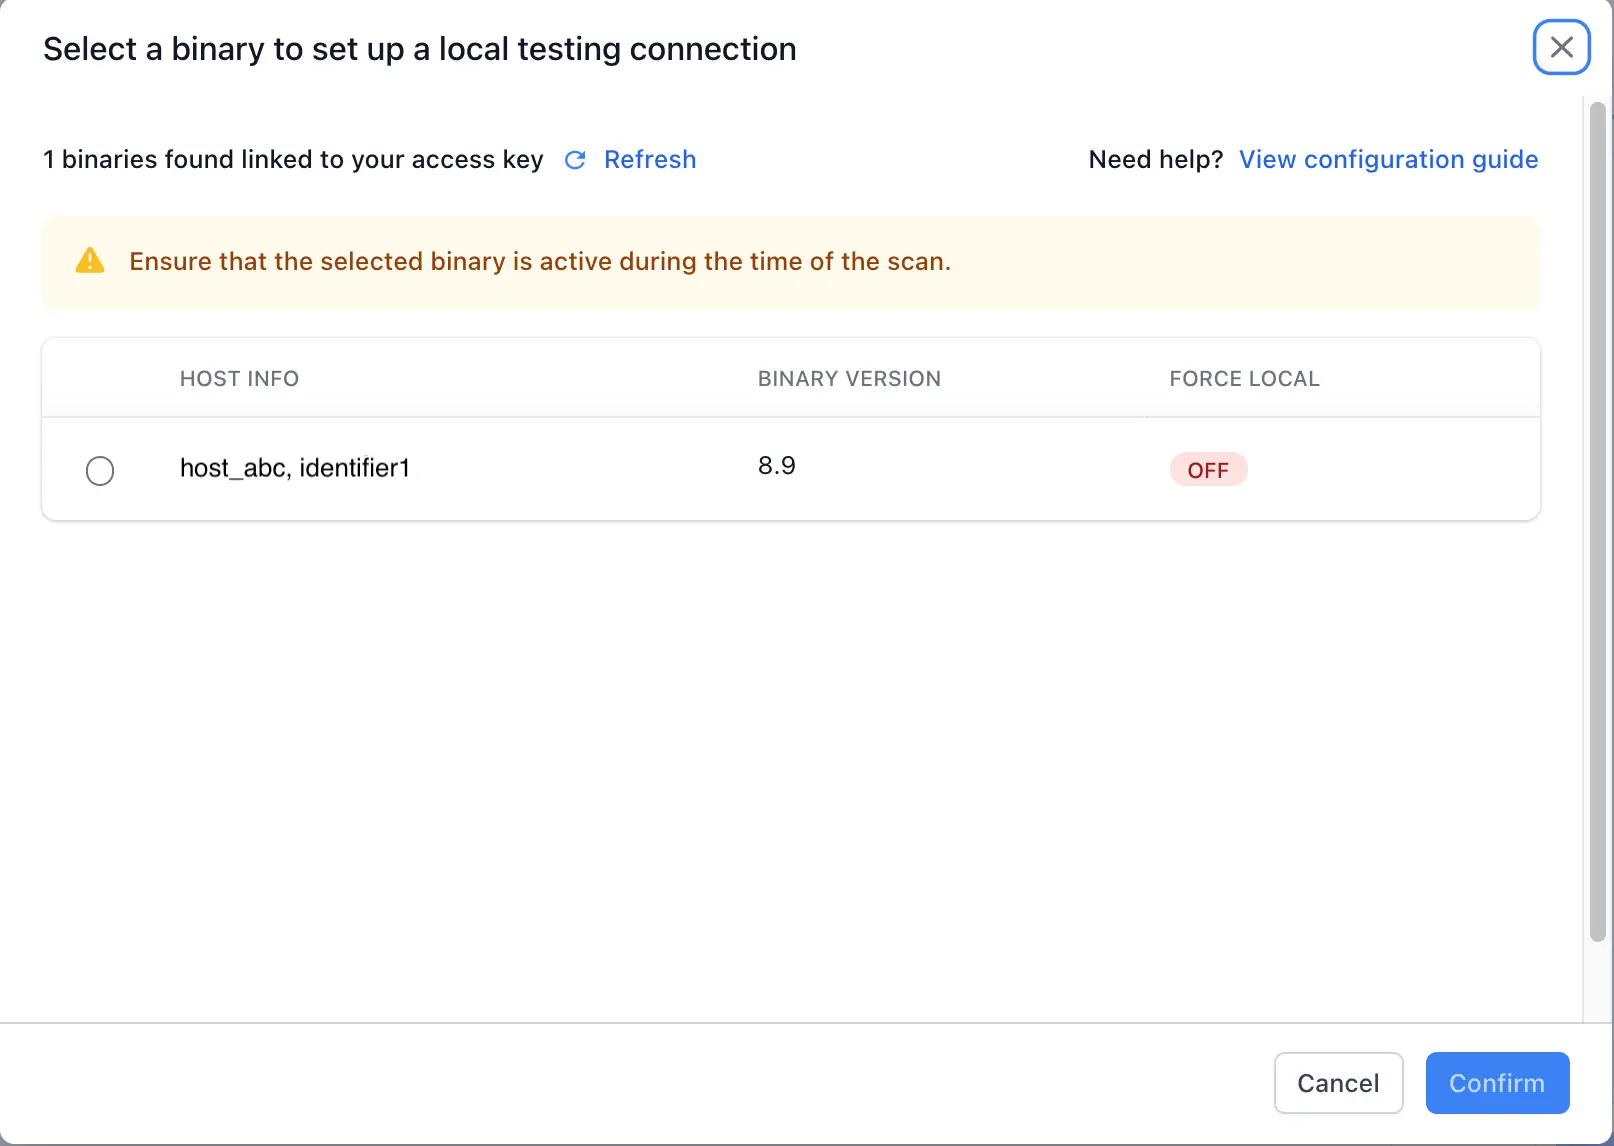 Select a local testing connection